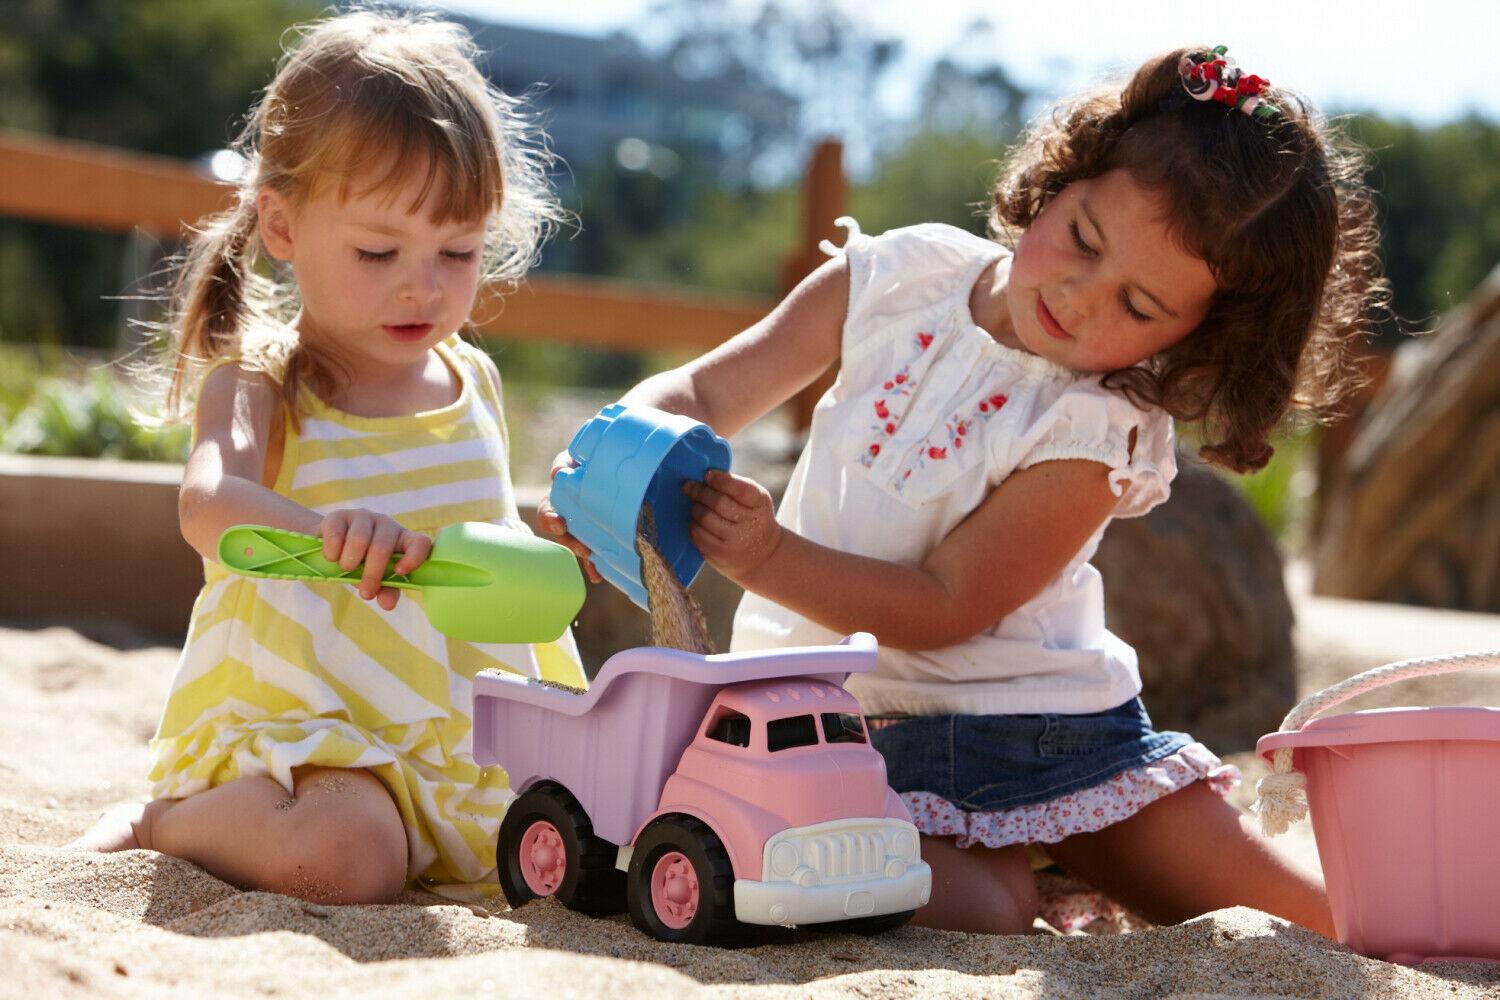 Two girls playing in a sandpit with pink dump truck.